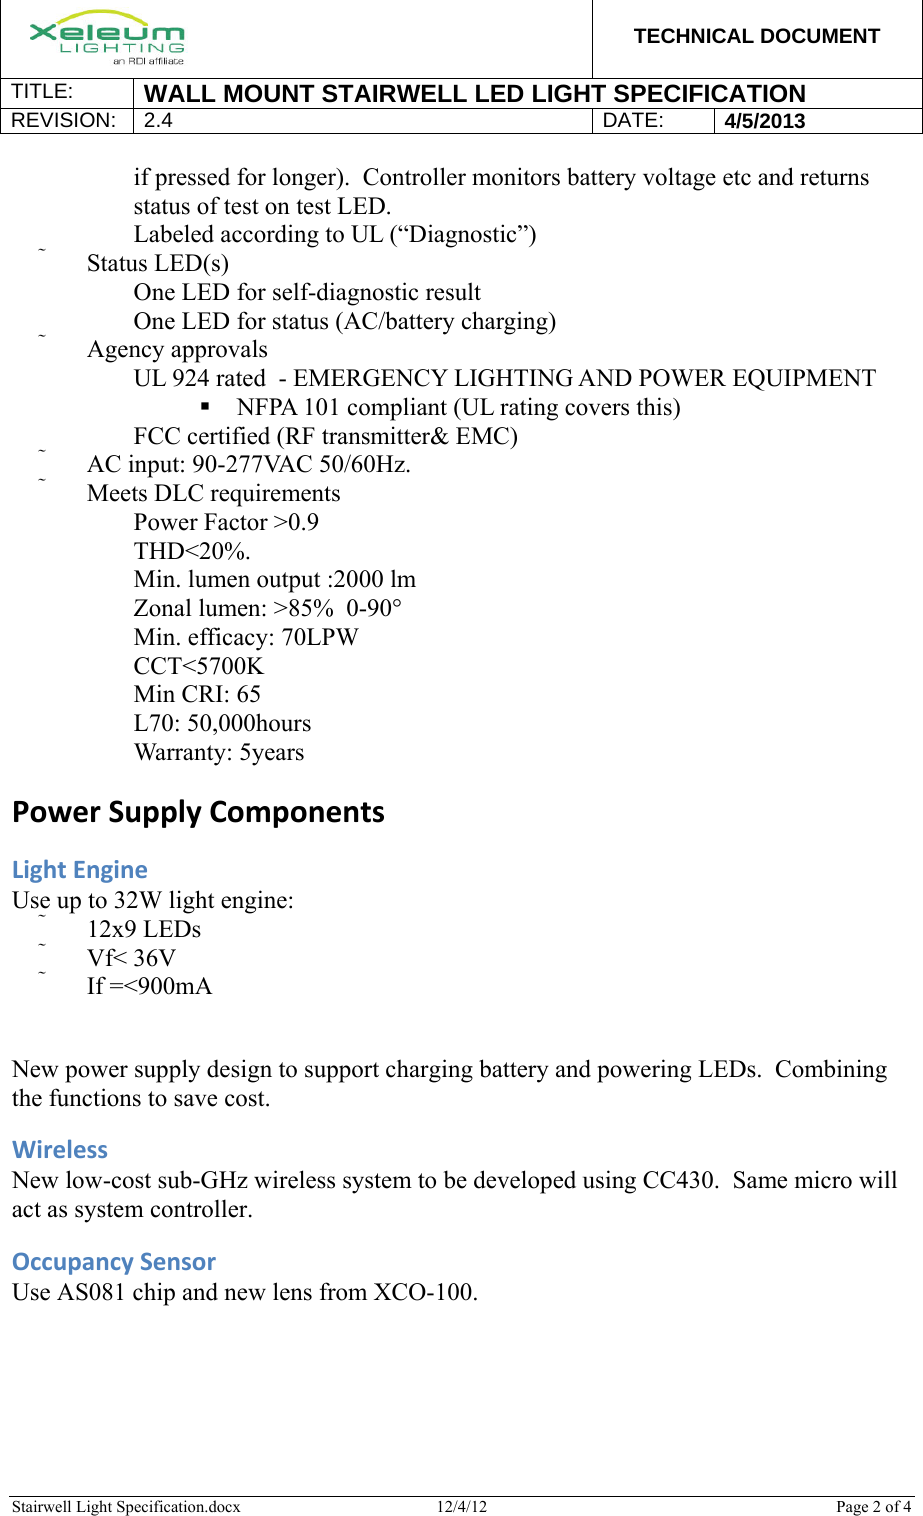  TECHNICAL DOCUMENT TITLE:  WALL MOUNT STAIRWELL LED LIGHT SPECIFICATION REVISION: 2.4 DATE: 4/5/2013  Stairwell Light Specification.docx  12/4/12  Page 2 of 4  if pressed for longer).  Controller monitors battery voltage etc and returns status of test on test LED. 　 Labeled according to UL (“Diagnostic”)  Status LED(s) 　 One LED for self-diagnostic result 　 One LED for status (AC/battery charging)  Agency approvals 　 UL 924 rated  - EMERGENCY LIGHTING AND POWER EQUIPMENT  NFPA 101 compliant (UL rating covers this) 　 FCC certified (RF transmitter&amp; EMC)  AC input: 90-277VAC 50/60Hz.  Meets DLC requirements 　 Power Factor &gt;0.9  　 THD&lt;20%. 　 Min. lumen output :2000 lm 　 Zonal lumen: &gt;85%  0-90° 　 Min. efficacy: 70LPW 　 CCT&lt;5700K 　 Min CRI: 65 　 L70: 50,000hours 　 Warranty: 5years PowerSupplyComponentsLightEngineUse up to 32W light engine:  12x9 LEDs  Vf&lt; 36V  If =&lt;900mA New power supply design to support charging battery and powering LEDs.  Combining the functions to save cost. WirelessNew low-cost sub-GHz wireless system to be developed using CC430.  Same micro will act as system controller. OccupancySensorUse AS081 chip and new lens from XCO-100. 